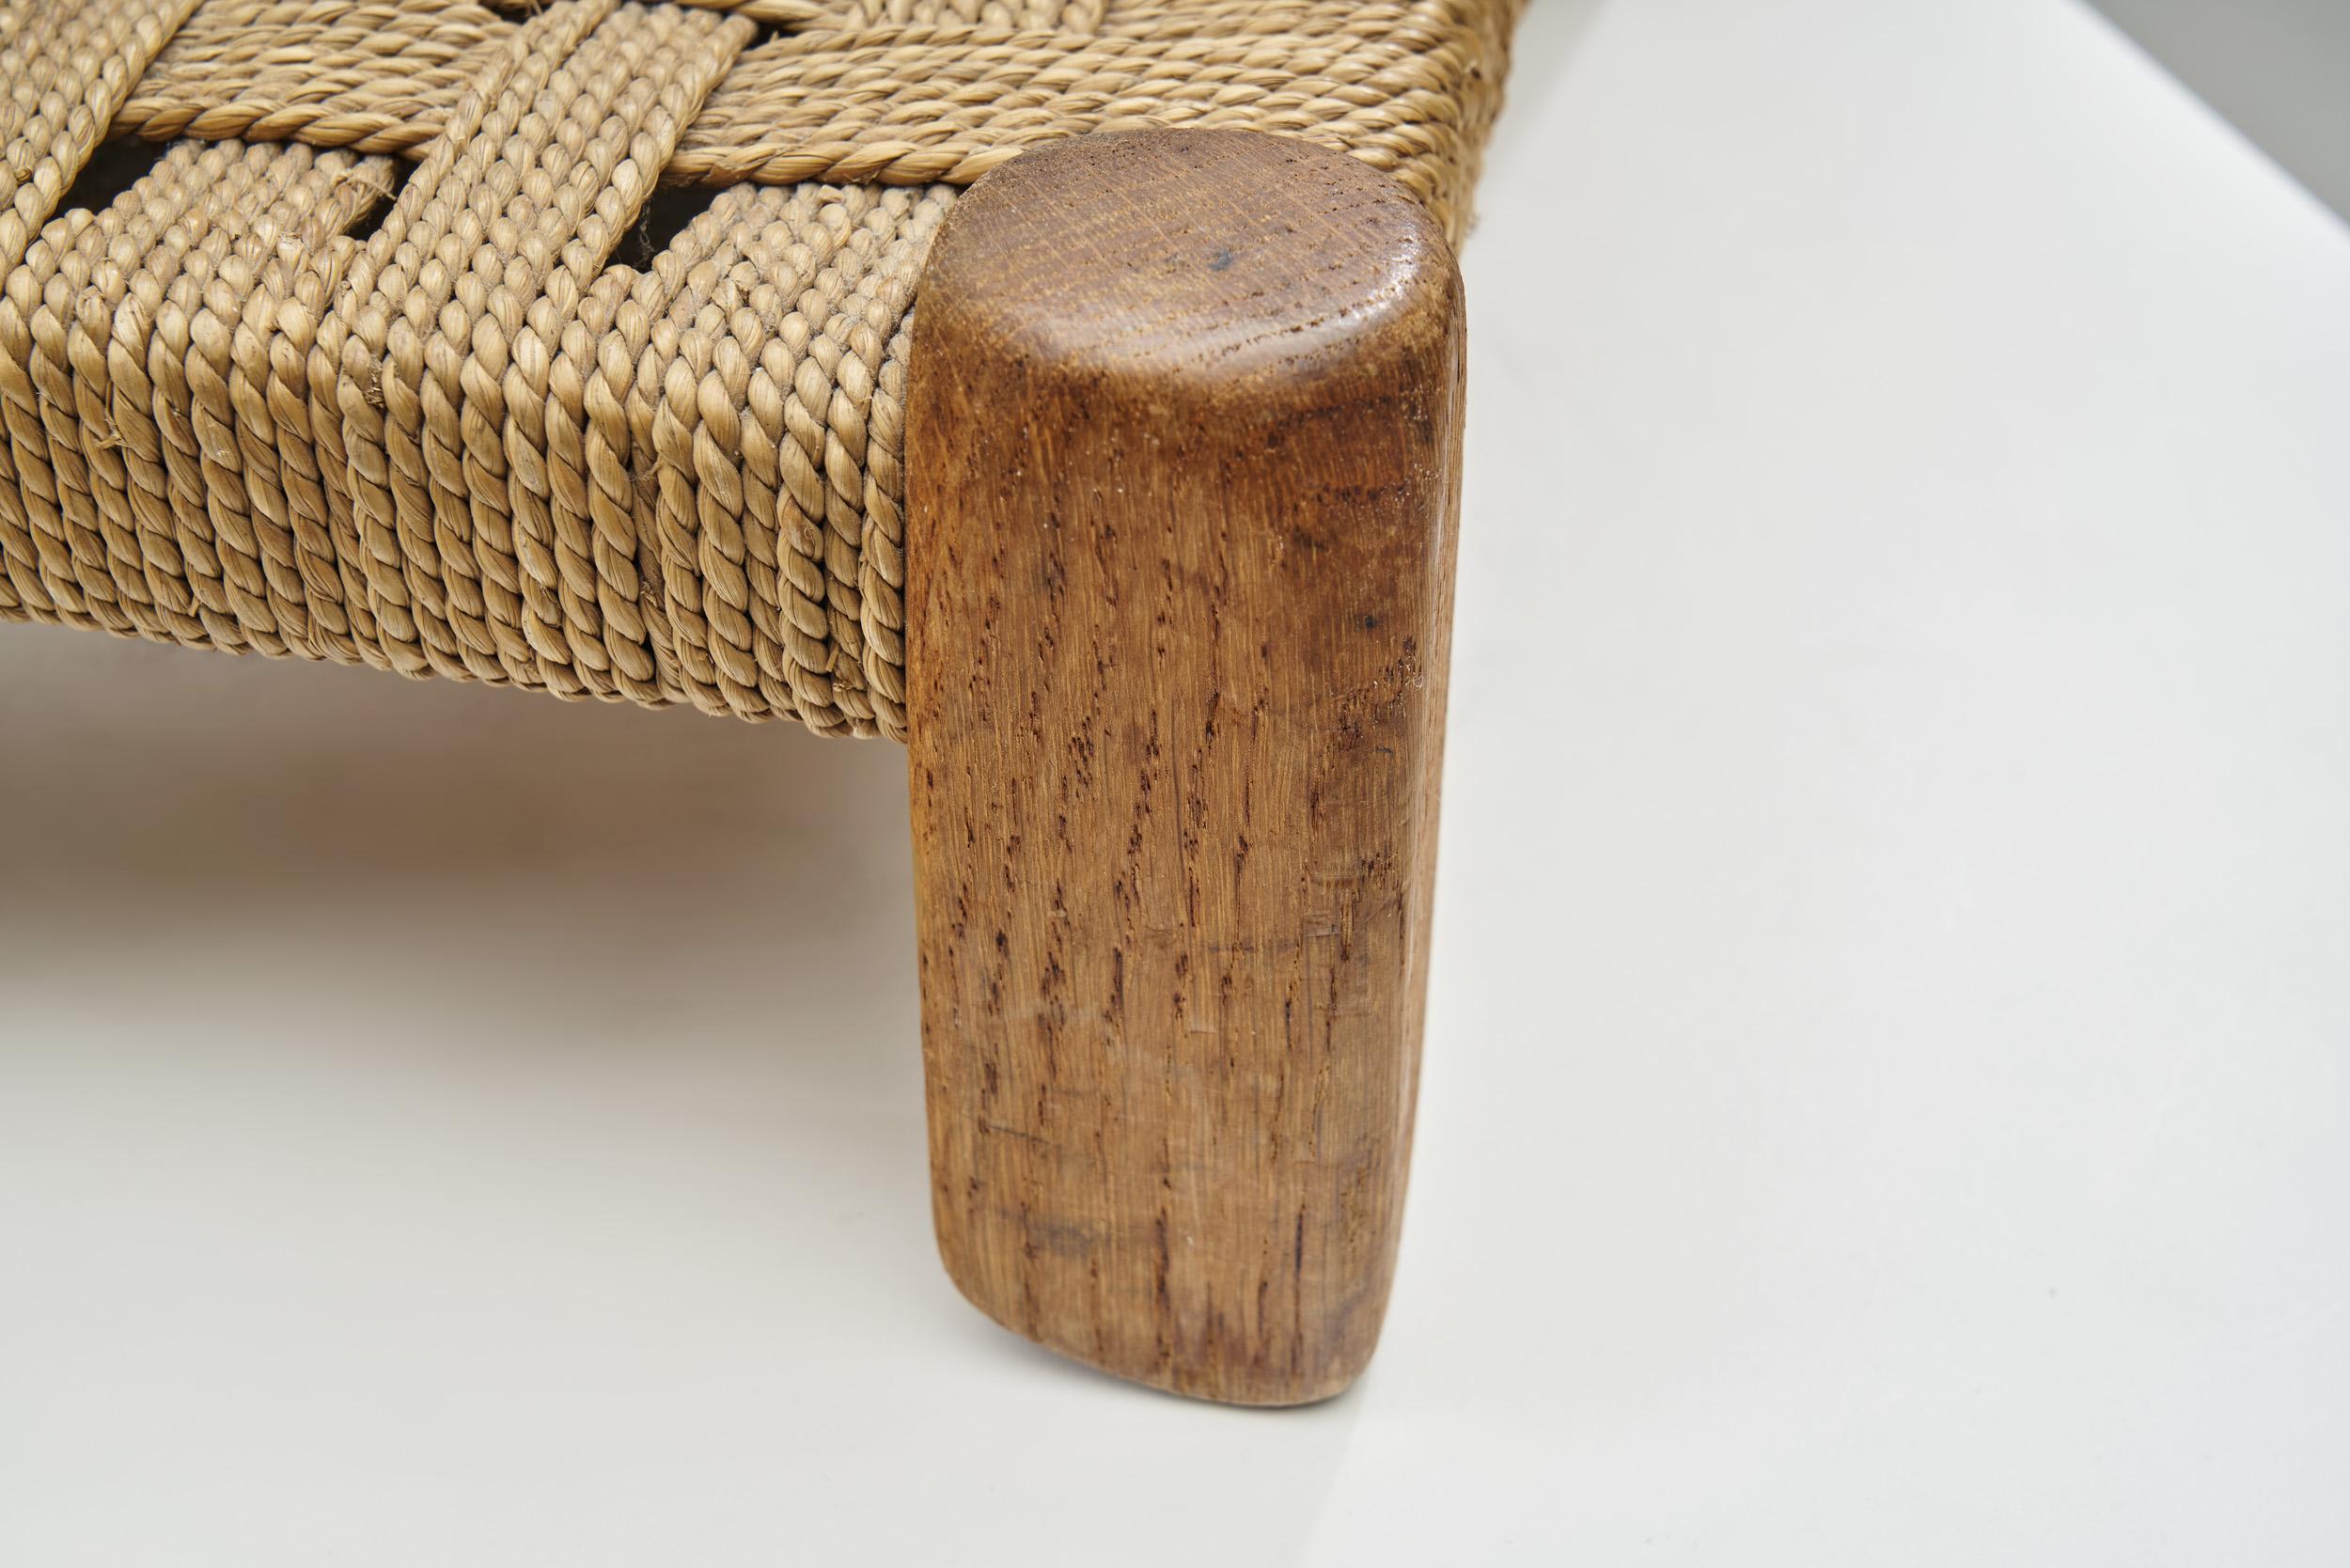 Woven Rush and Wood Stool, Europe ca 1950s For Sale 3